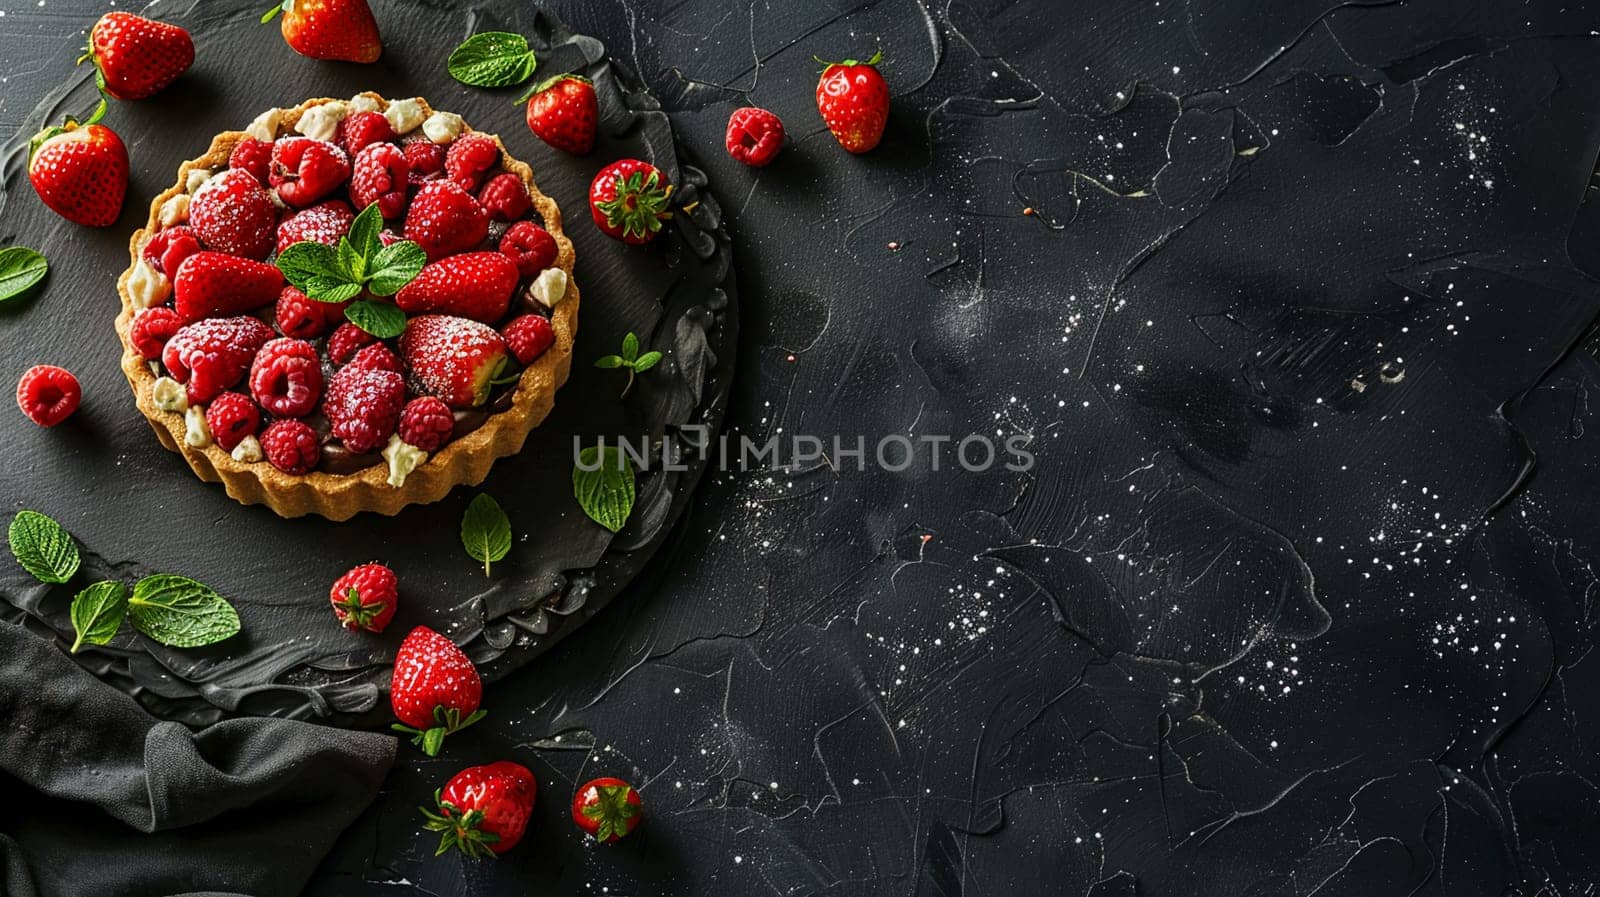 Gourmet strawberry raspberry tart garnished with fresh mint leaves, sprinkled with sugar, presented on a dark backdrop featuring elegant texture and contrast.